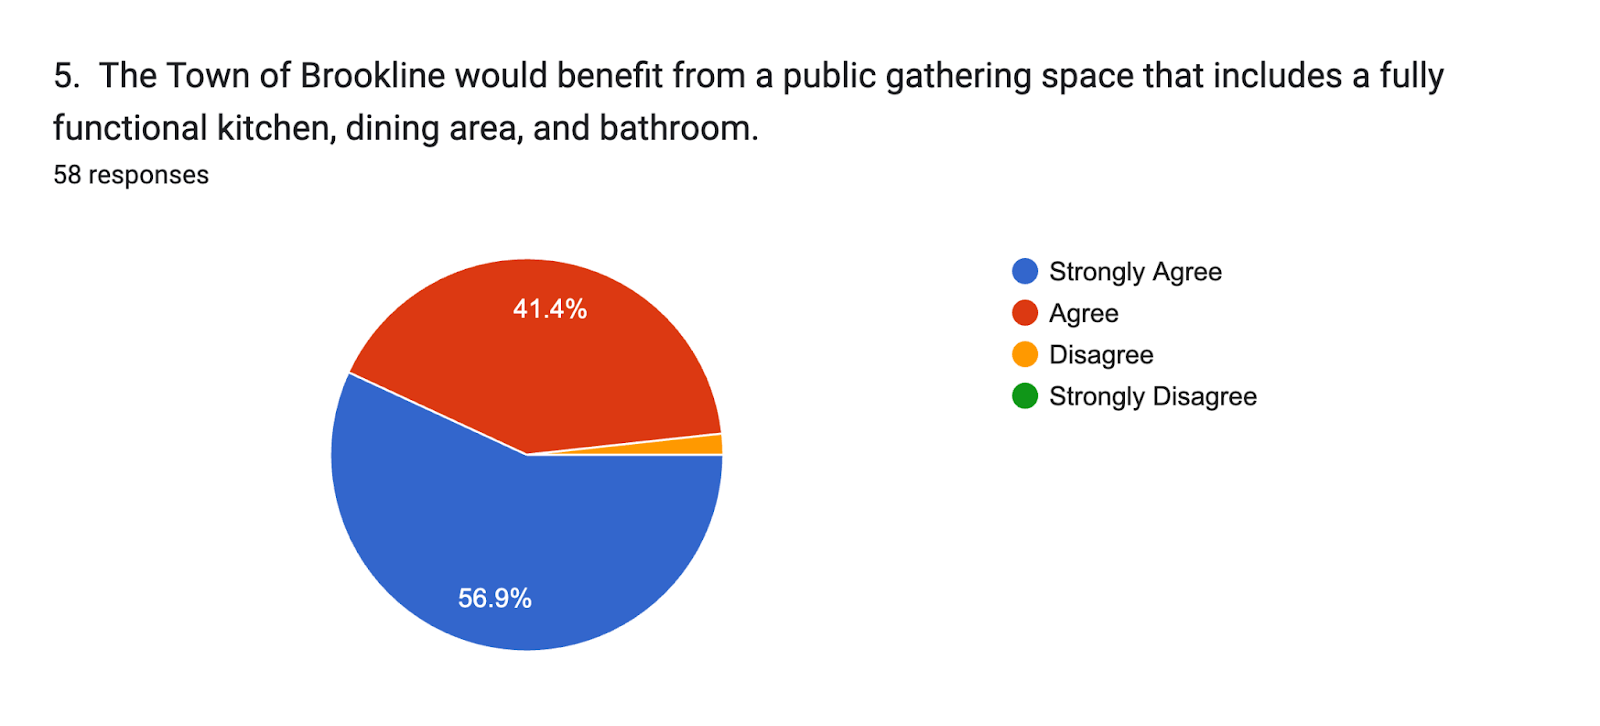 Forms response chart. Question title: 5.  The Town of Brookline would benefit from a public gathering space that includes a fully functional kitchen, dining area, and bathroom.
. Number of responses: 58 responses.